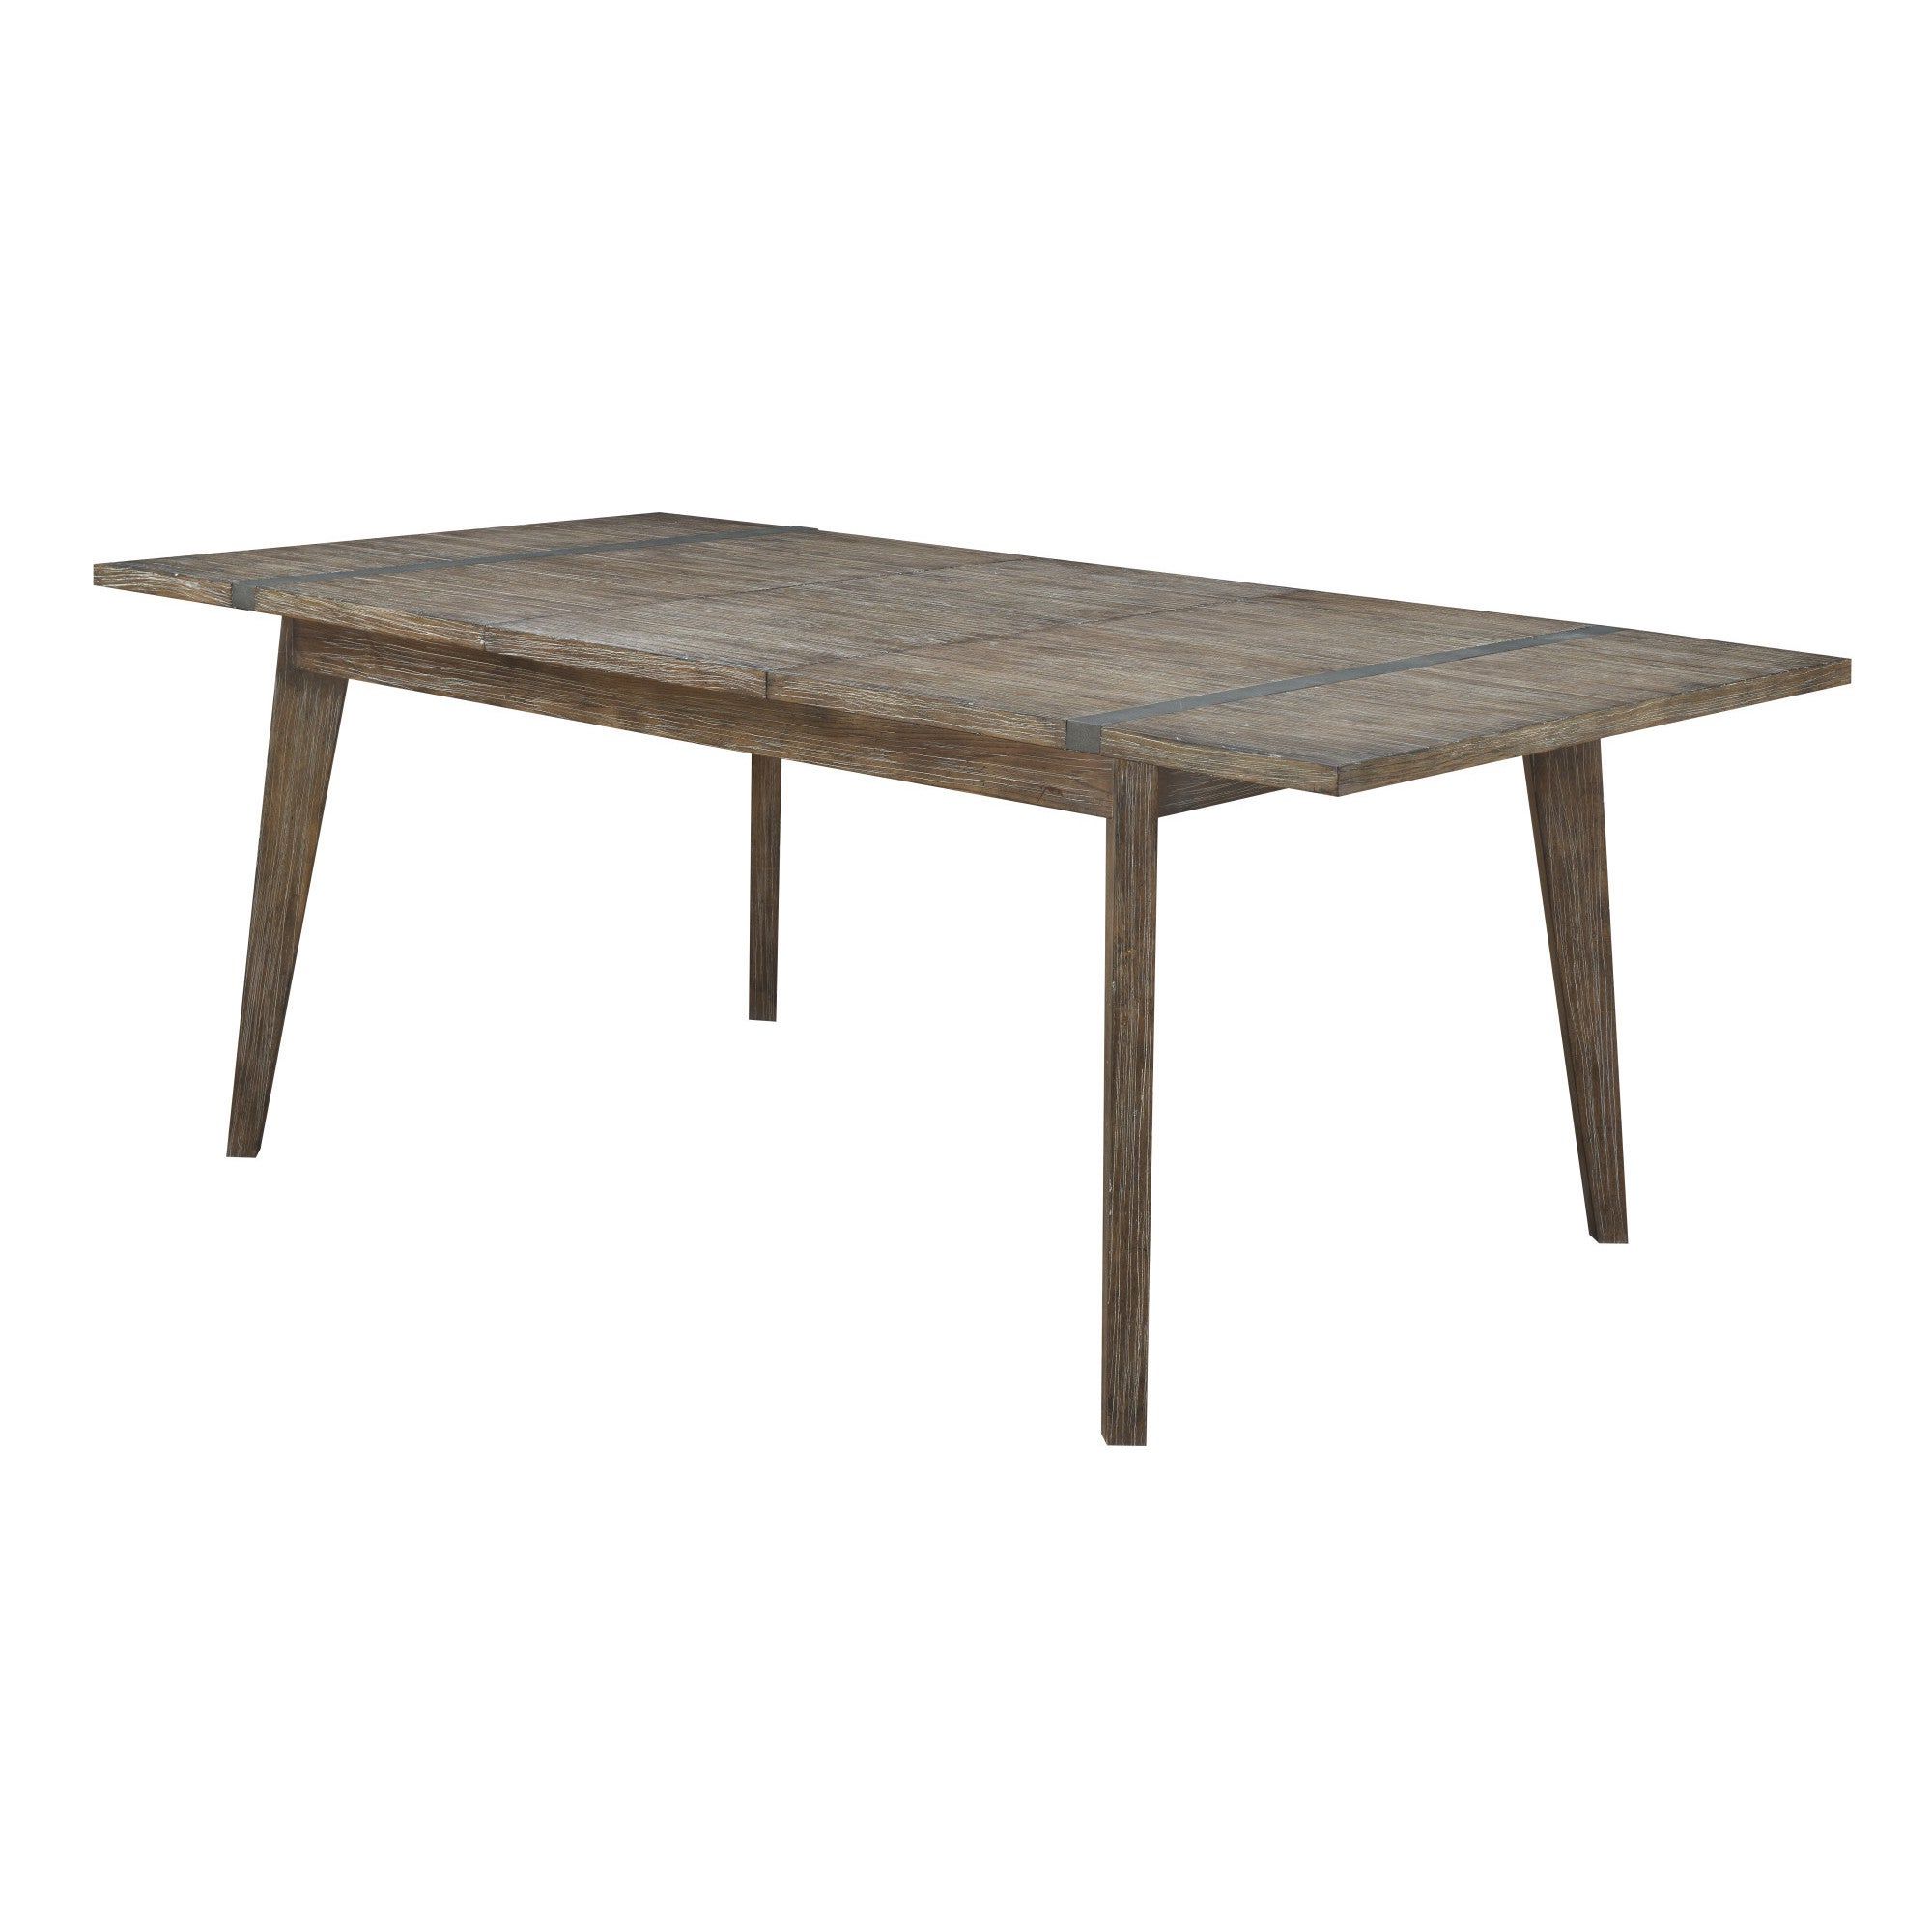 Fashionable Gray Wash Benchwright Dining Tables Throughout Viewpoint Driftwood Gray 60" Dining Table With Self Storing Butterfly  Extension Leaf And Metal Detailing – Grey (View 19 of 25)